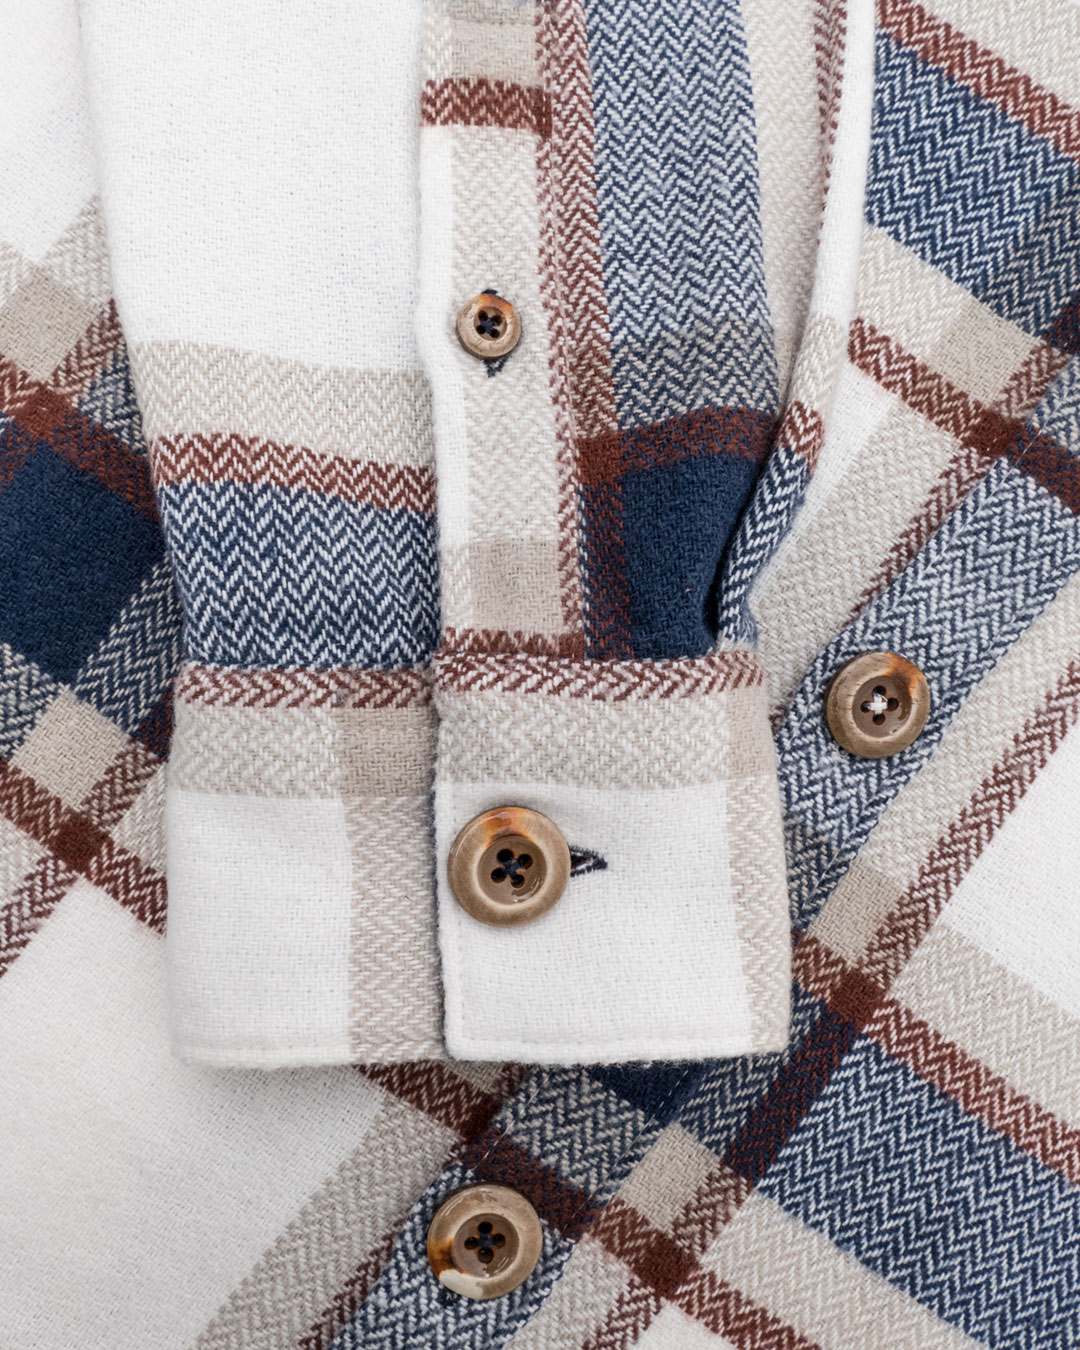 Colours & Sons Flanell Overshirt Check L